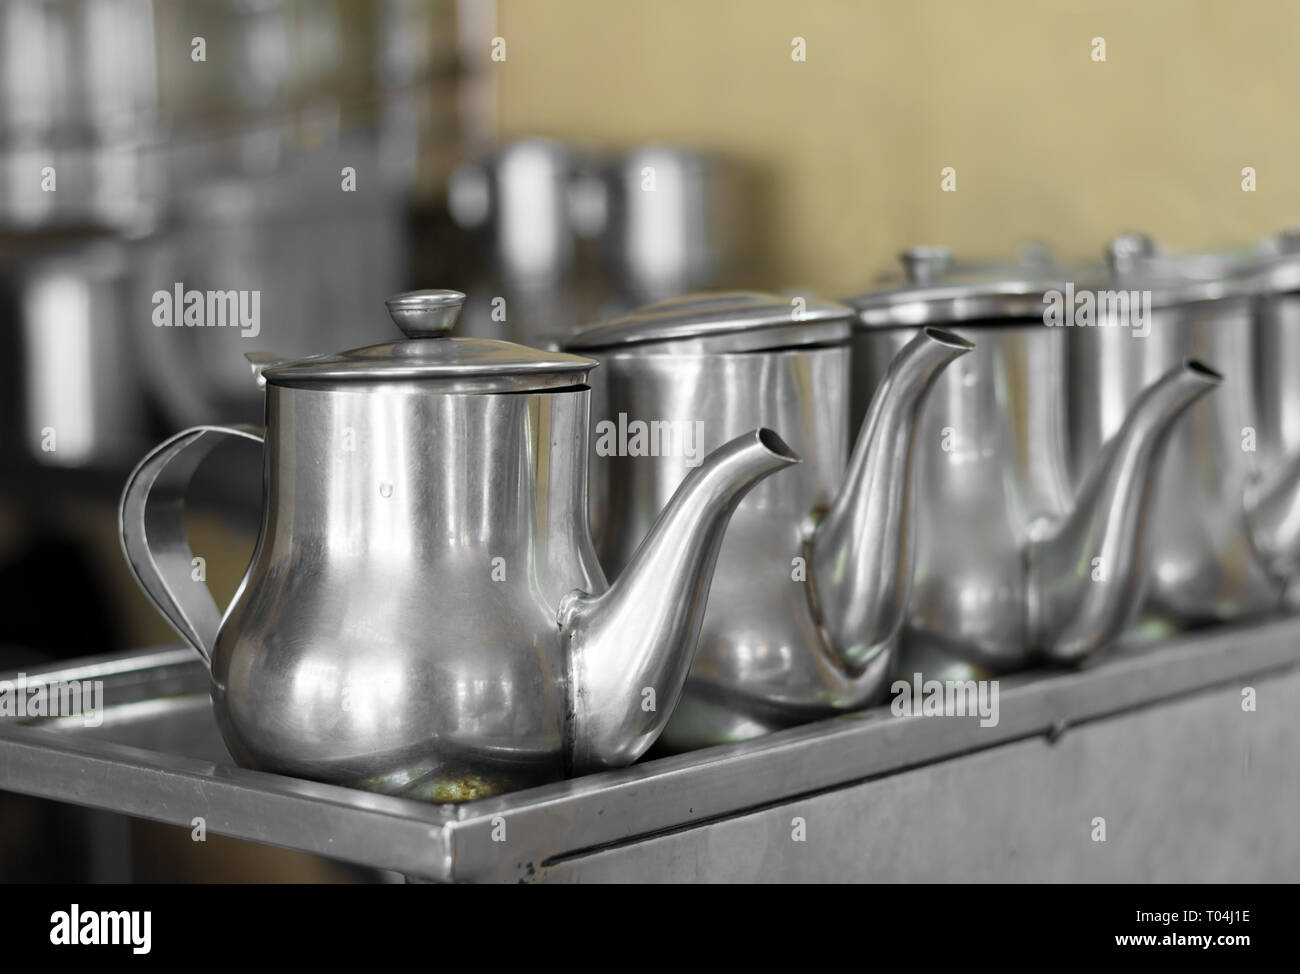 line of identical stainless steel tea pots Stock Photo